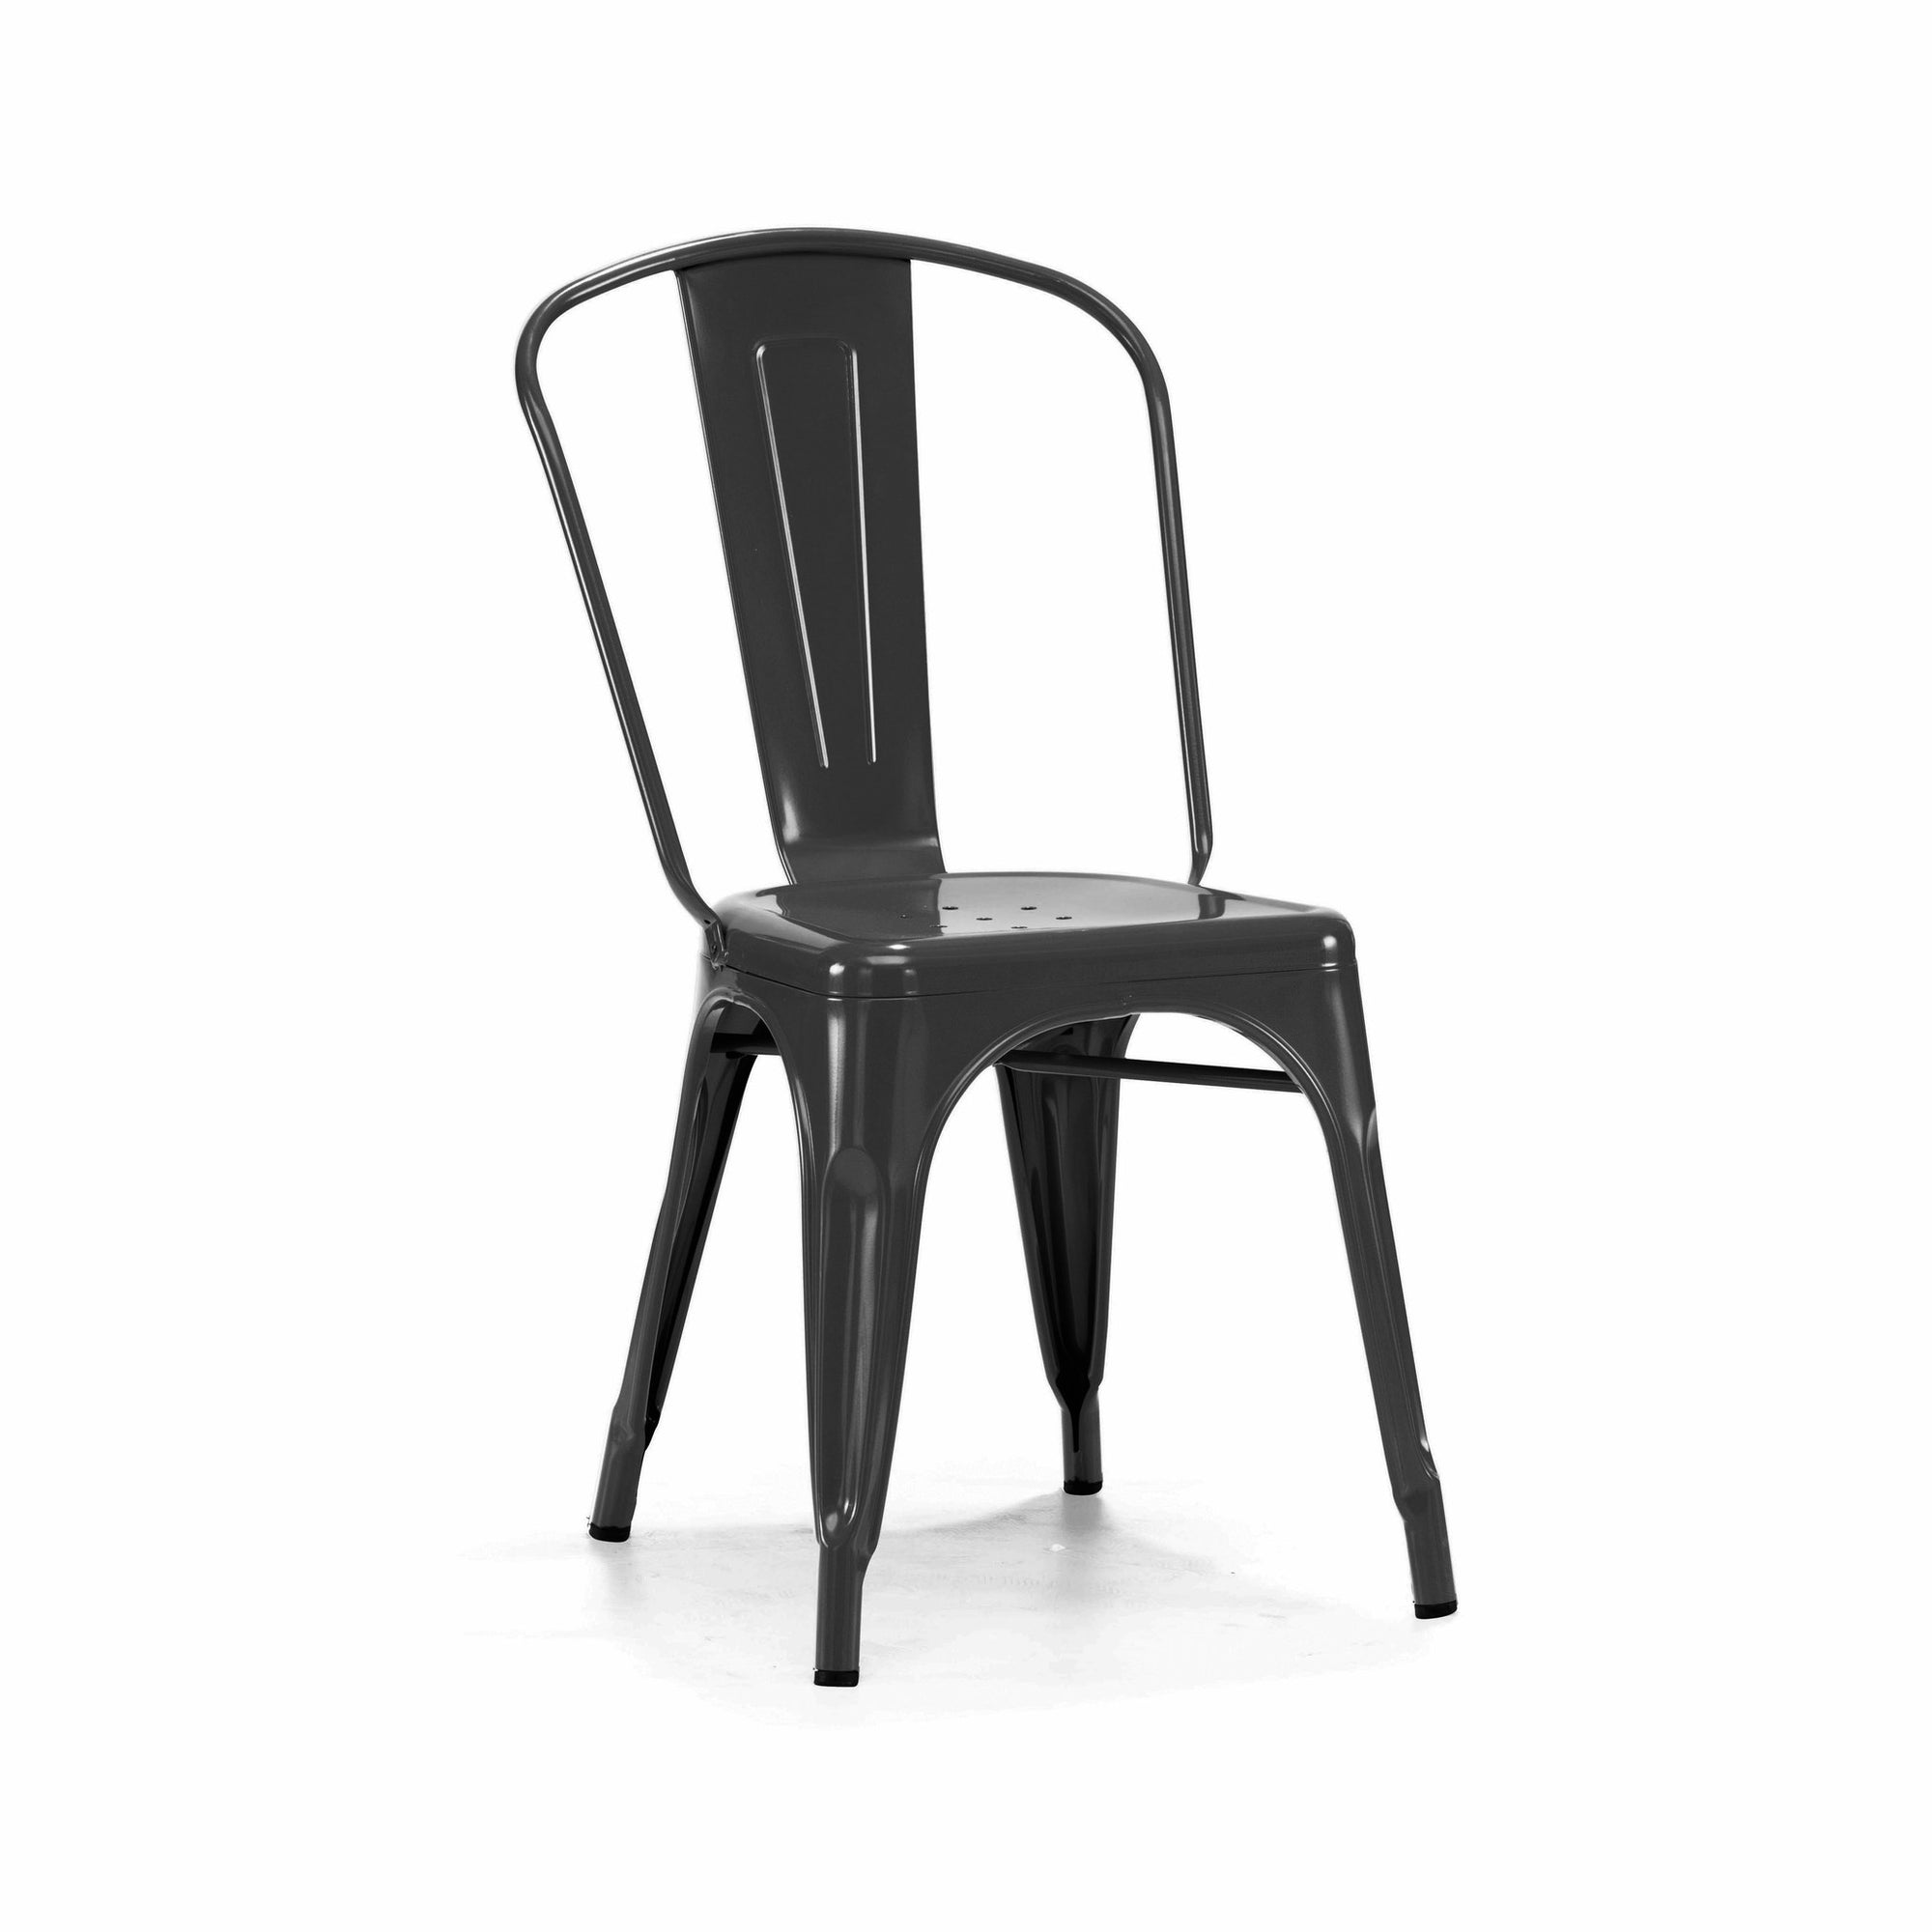 DesignLabMN-Dreux Glossy Steel Side Chair (Set of 4)-Dining Chair-MODTEMPO